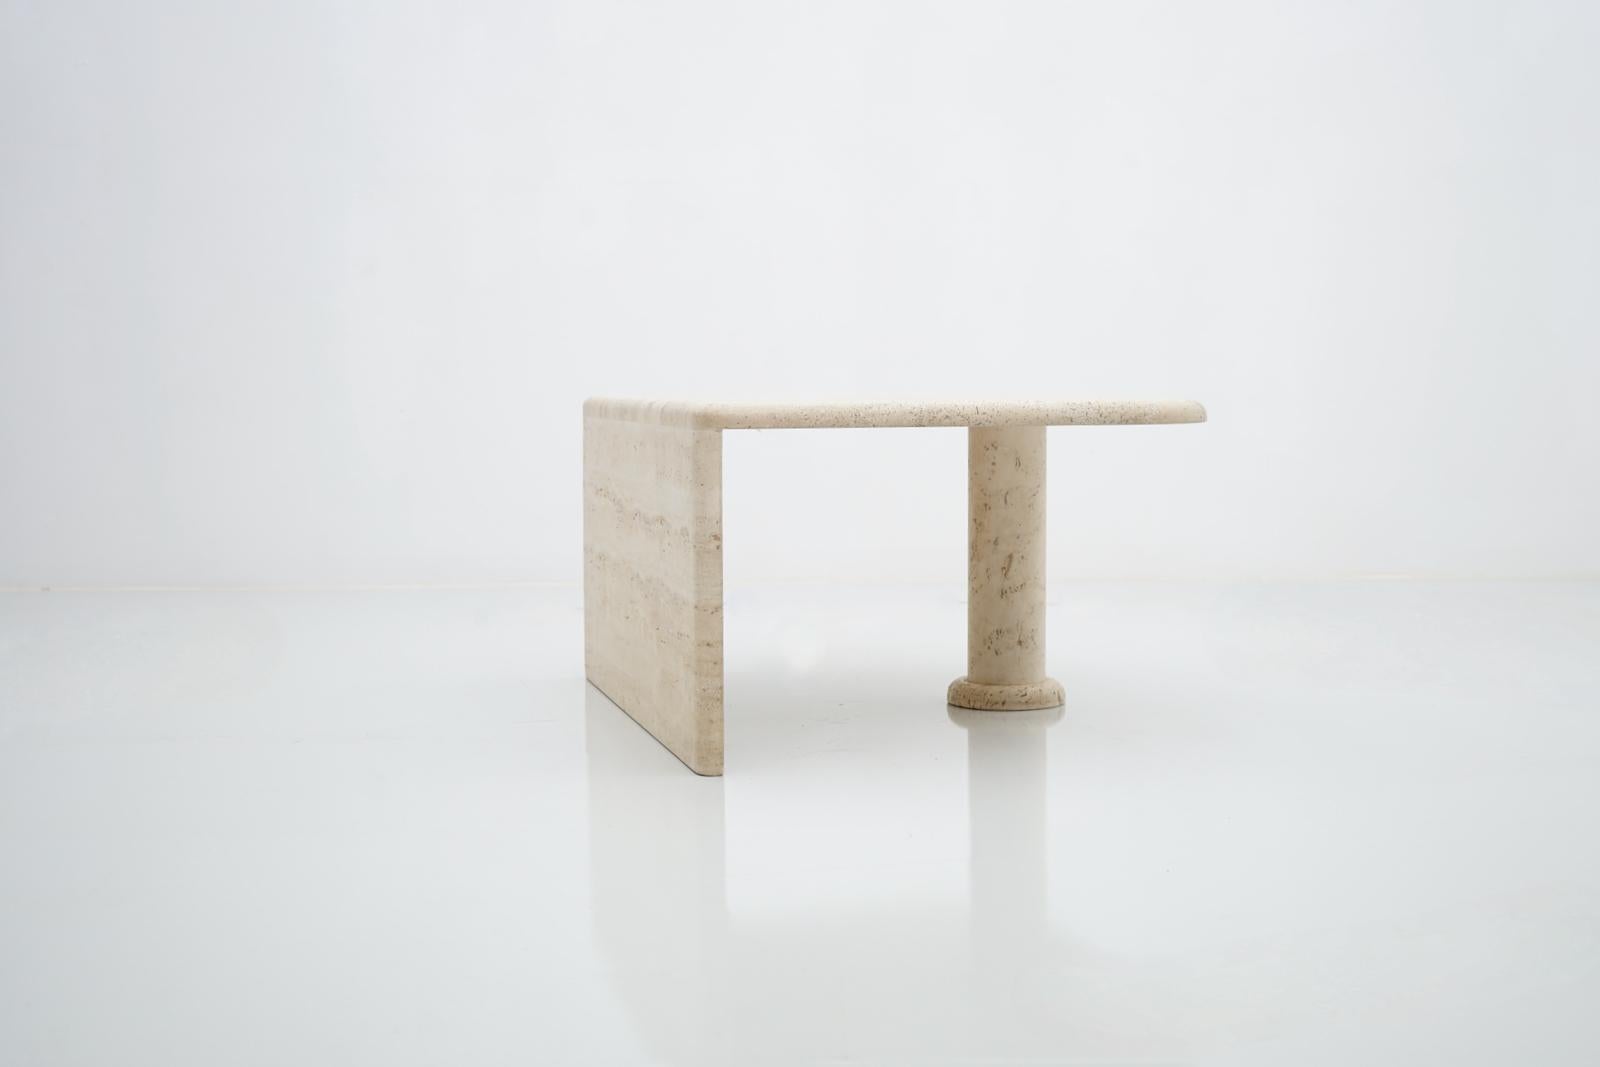 Single travertine table with a column. 
The table can be used as a coffee table, side table or as a bedside table. 
The condition test very good without damage. 

The table will be securely packed in a wooden box.



Details:

Creator: